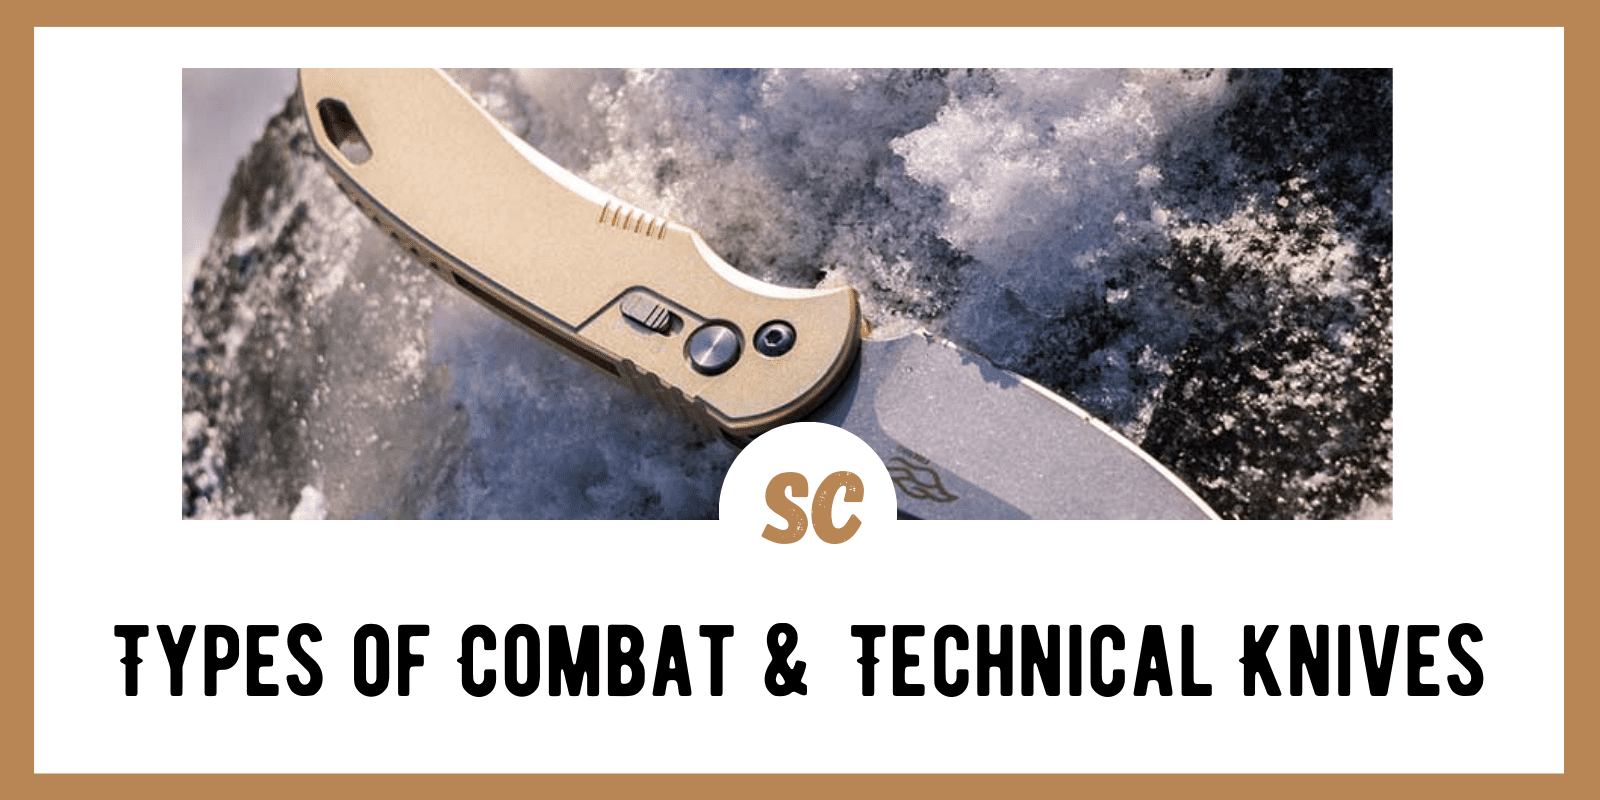 Types of Combat & Technical Knives